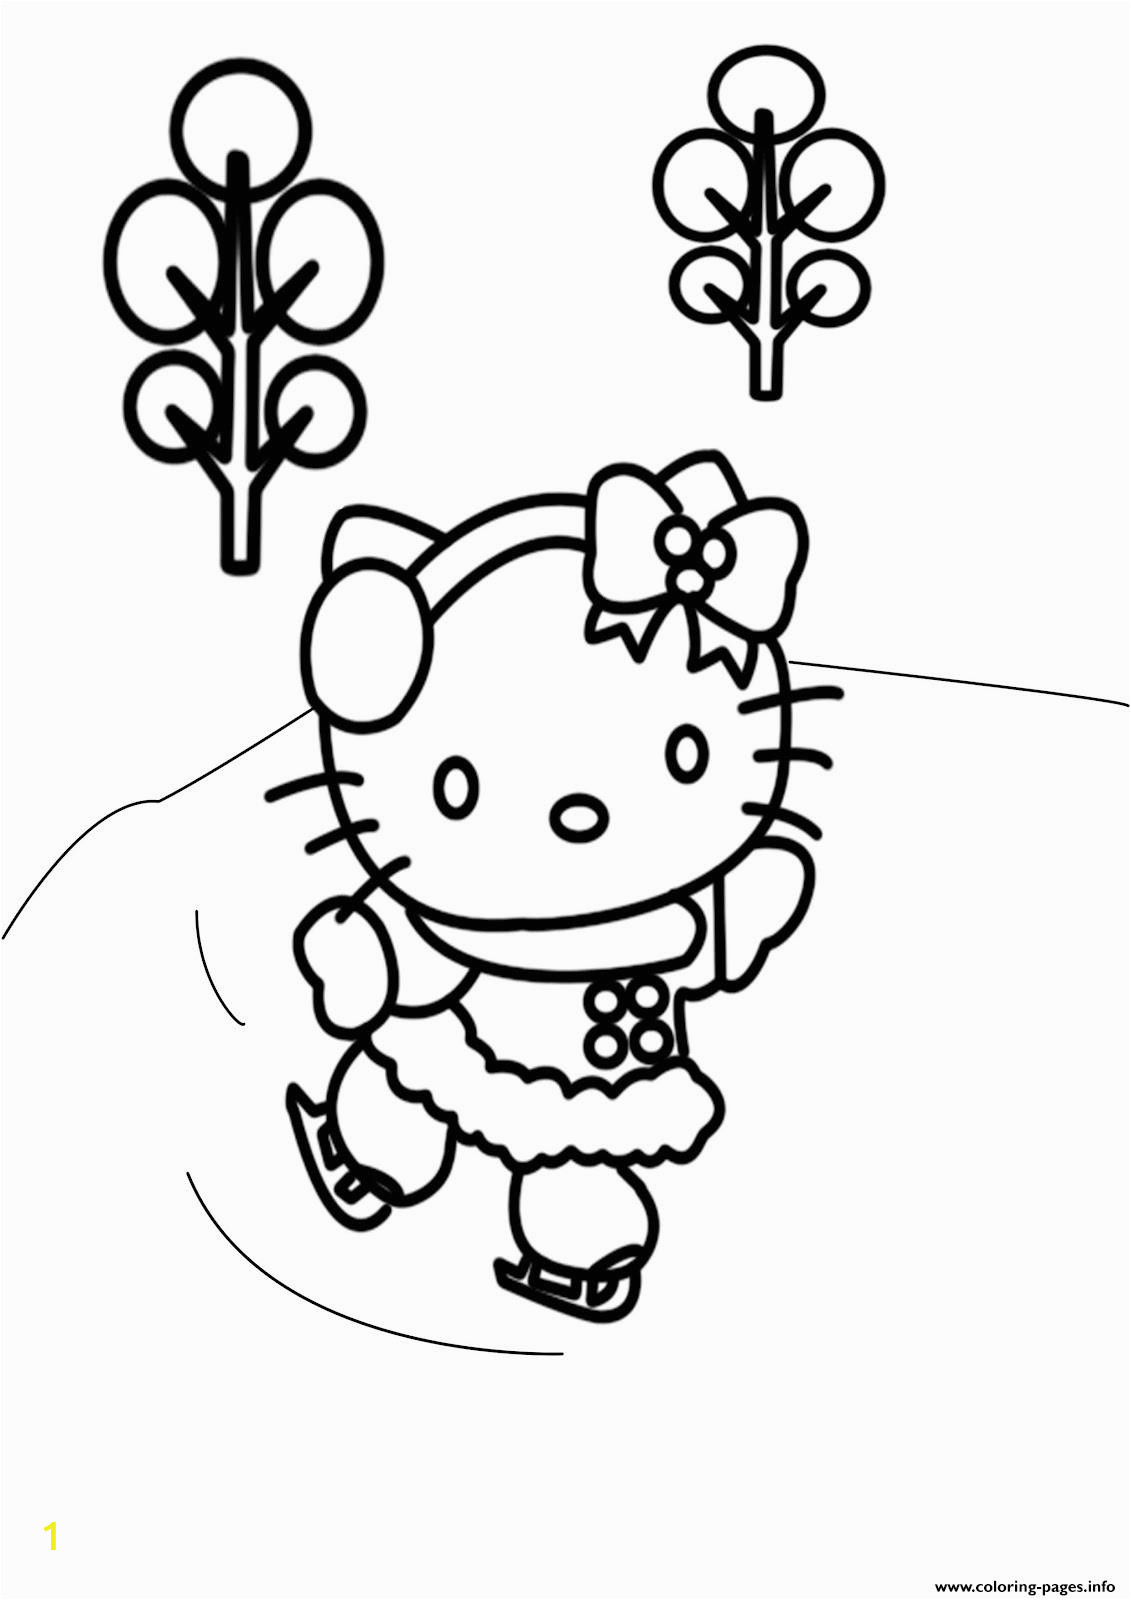 Hello Kitty Ice Skating Coloring Pages Free Winter S Hello Kitty Skatingb521 Coloring Pages Printable